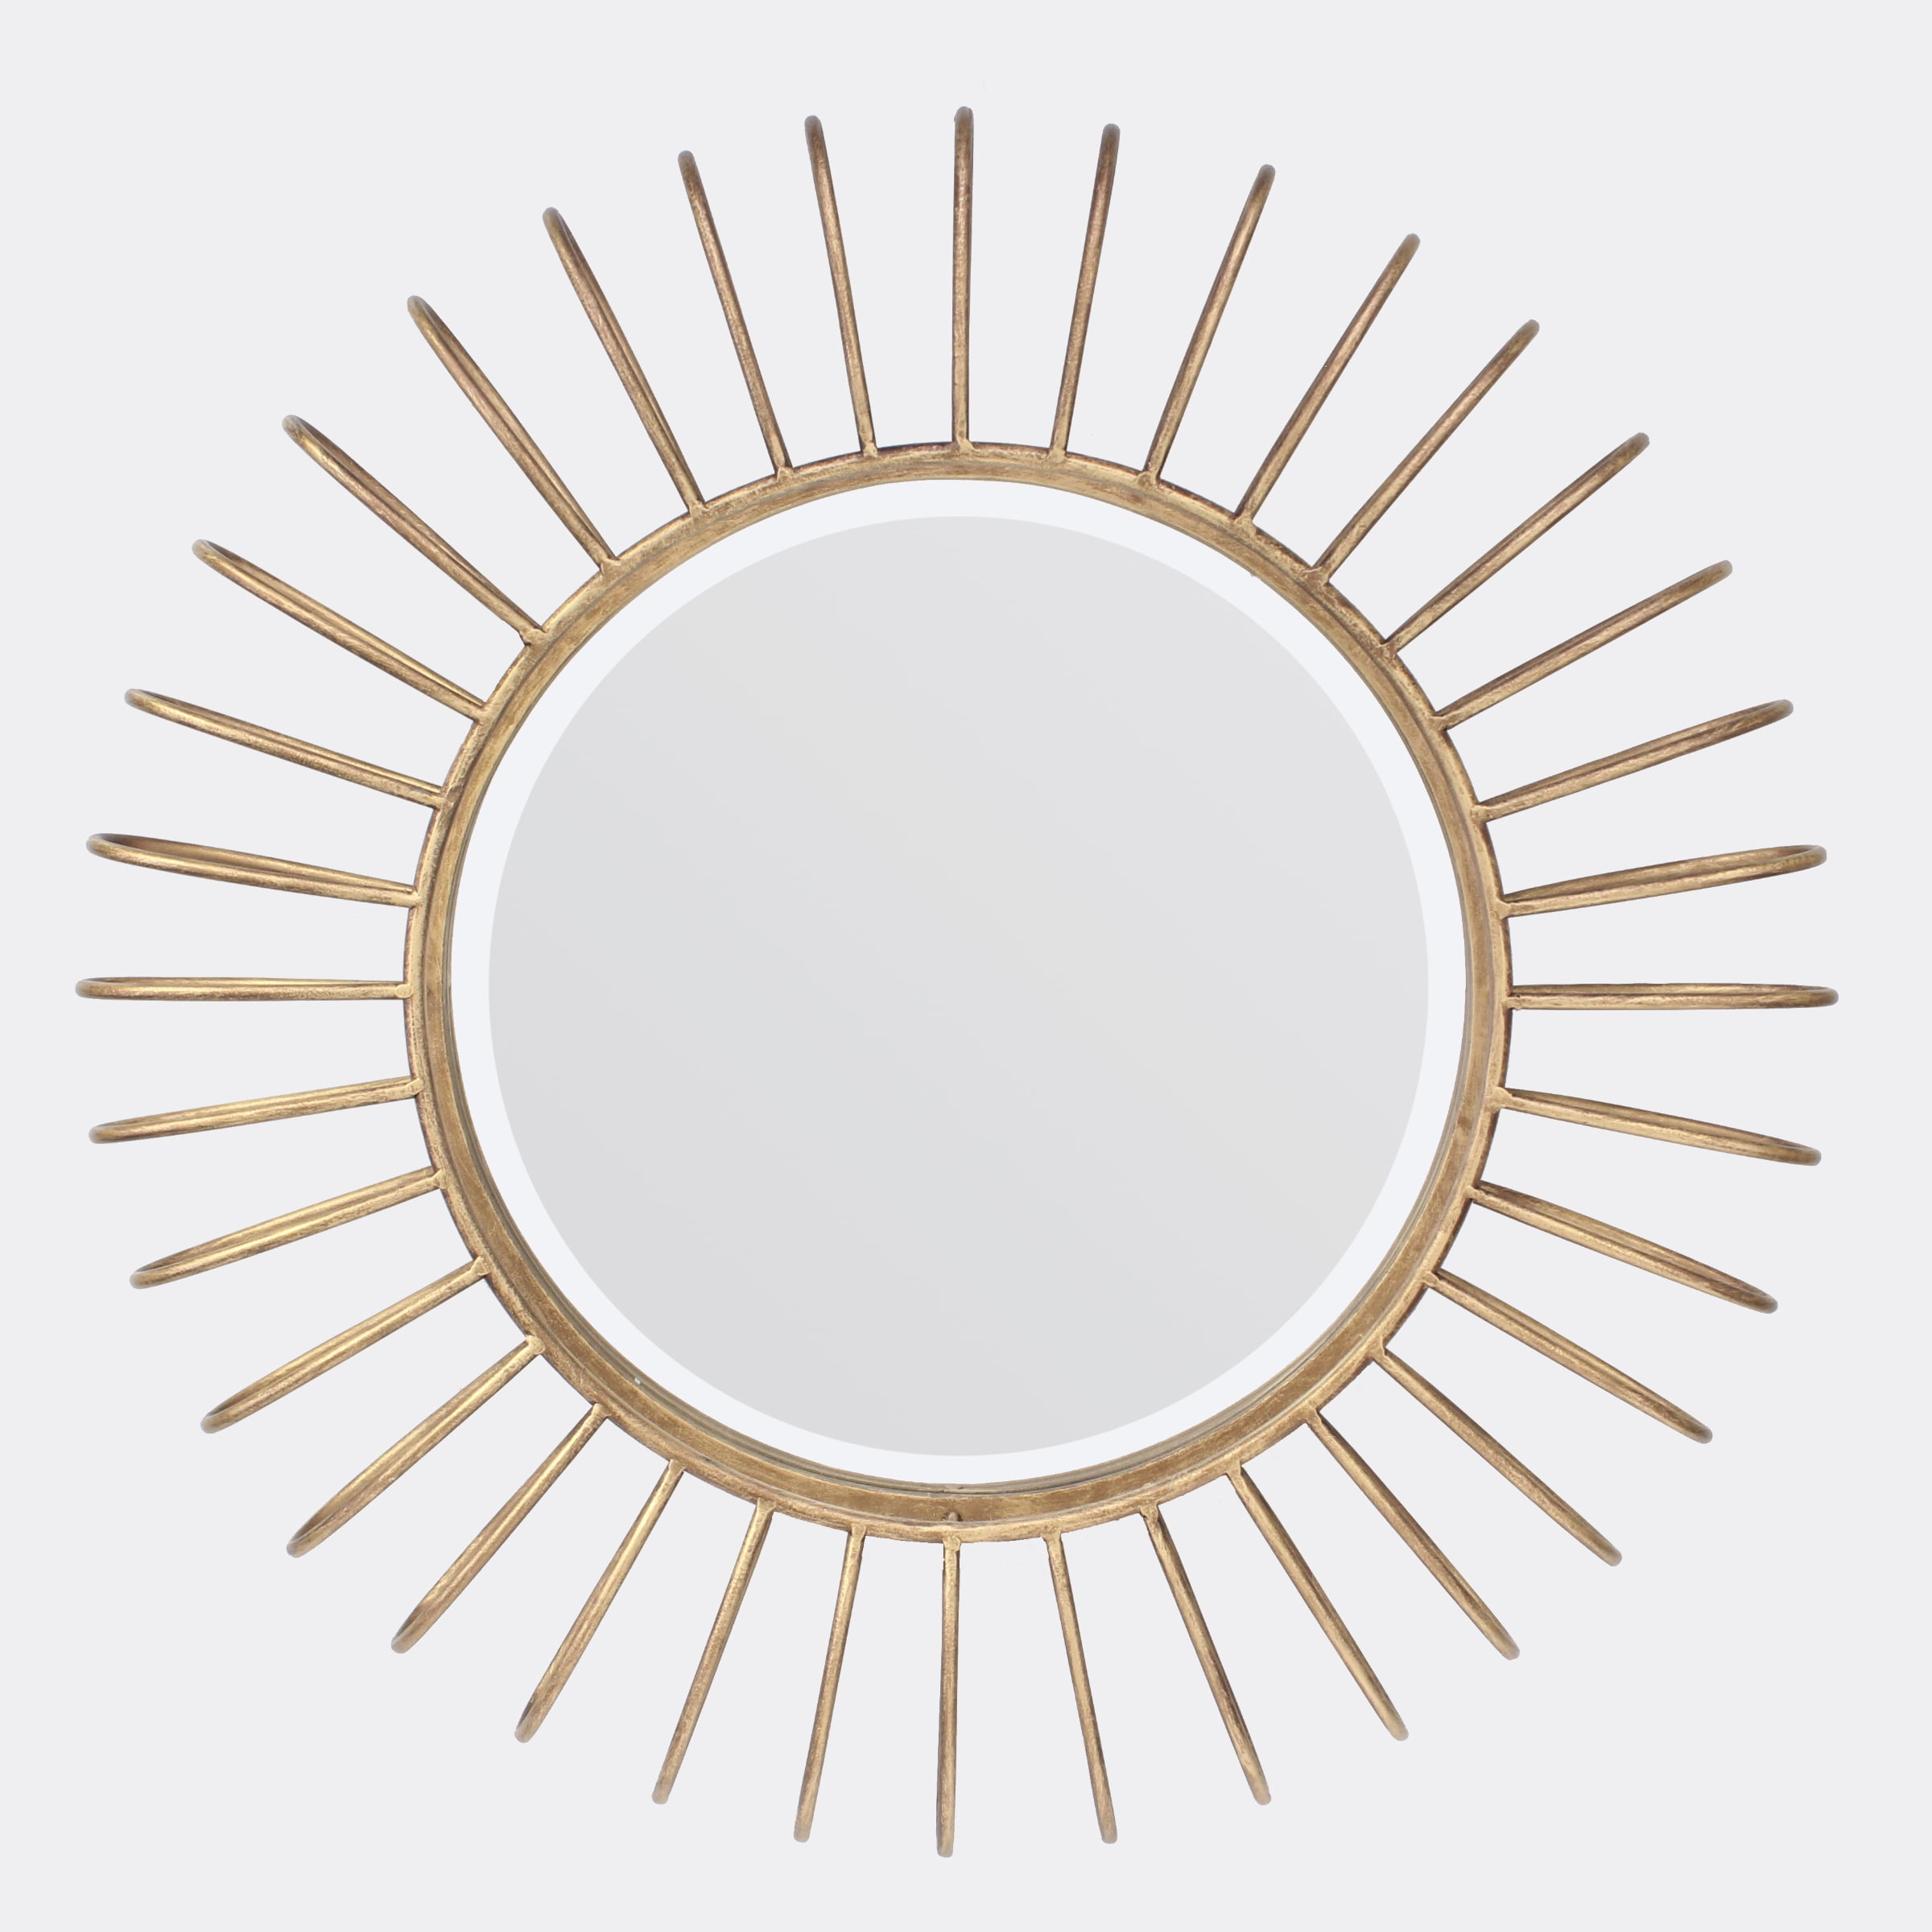 Uniquewise 19.75 in. W x 19.75 in. H Decorative Round Frame Gold Metal Wall  Mounted Modern Mirror with 4 Glass Mirror Balls QI004577 - The Home Depot